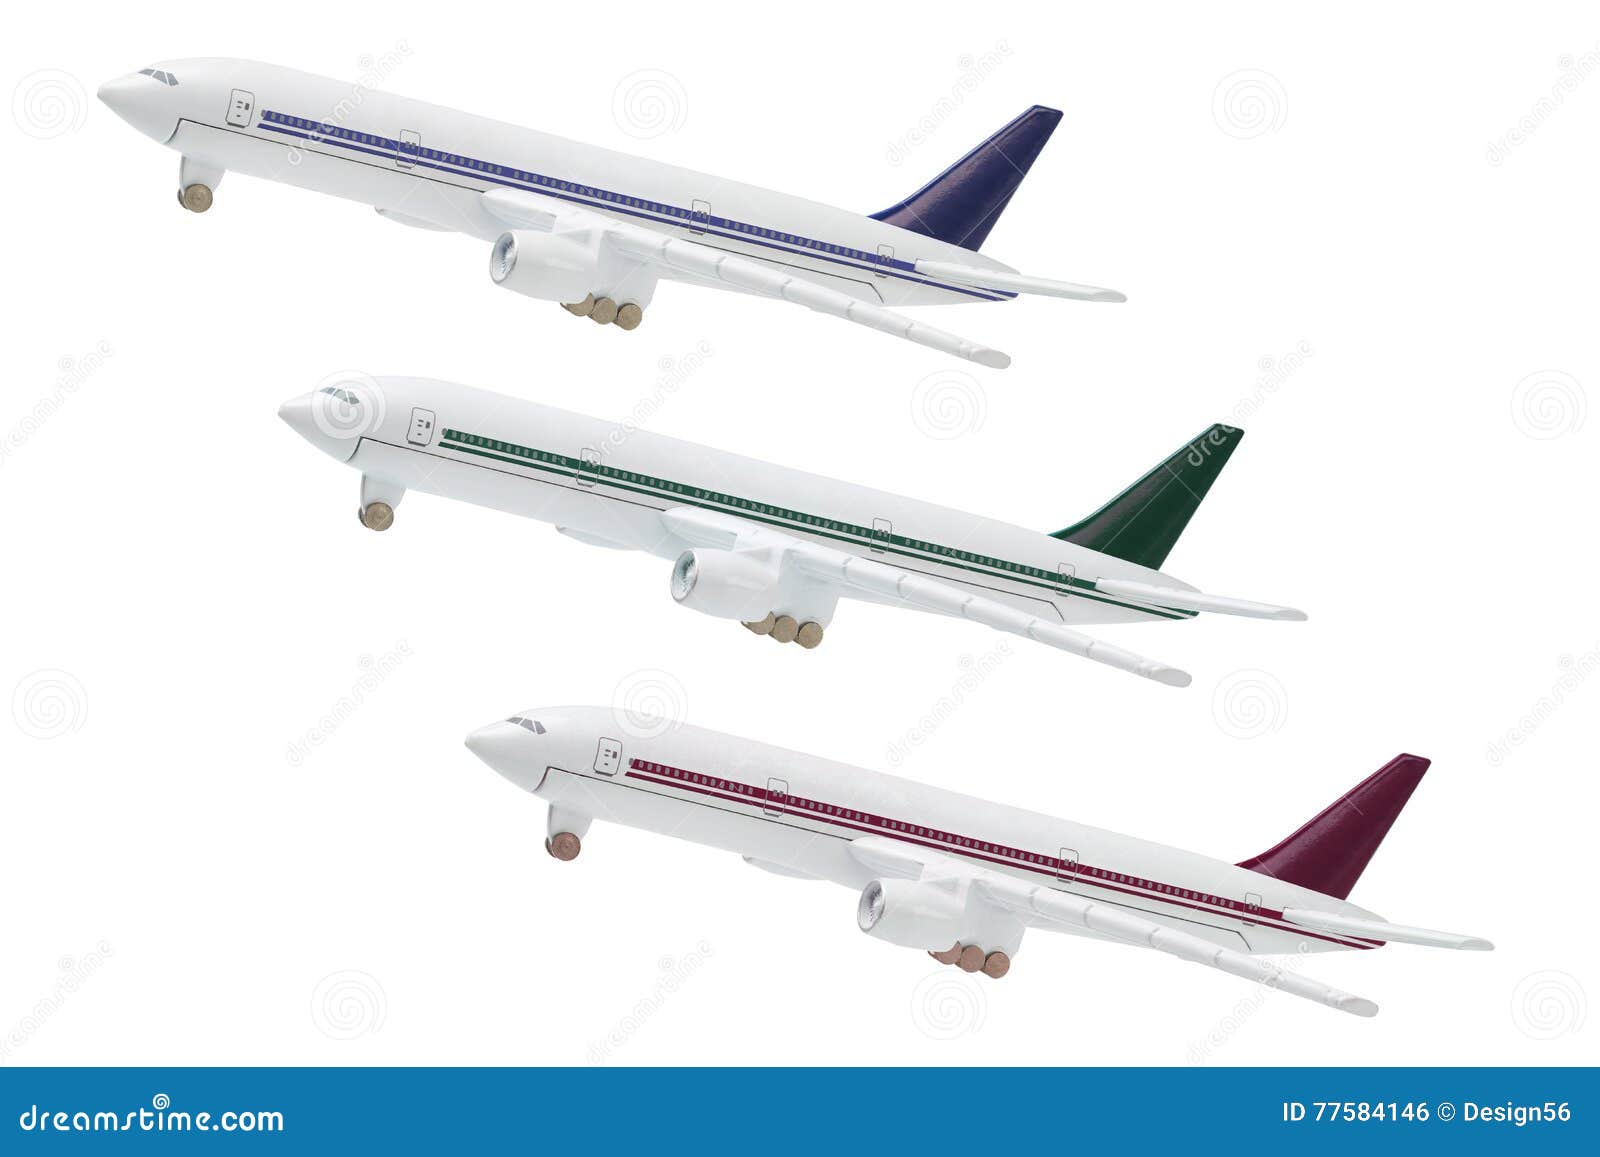 miniature model of commercial jetliners